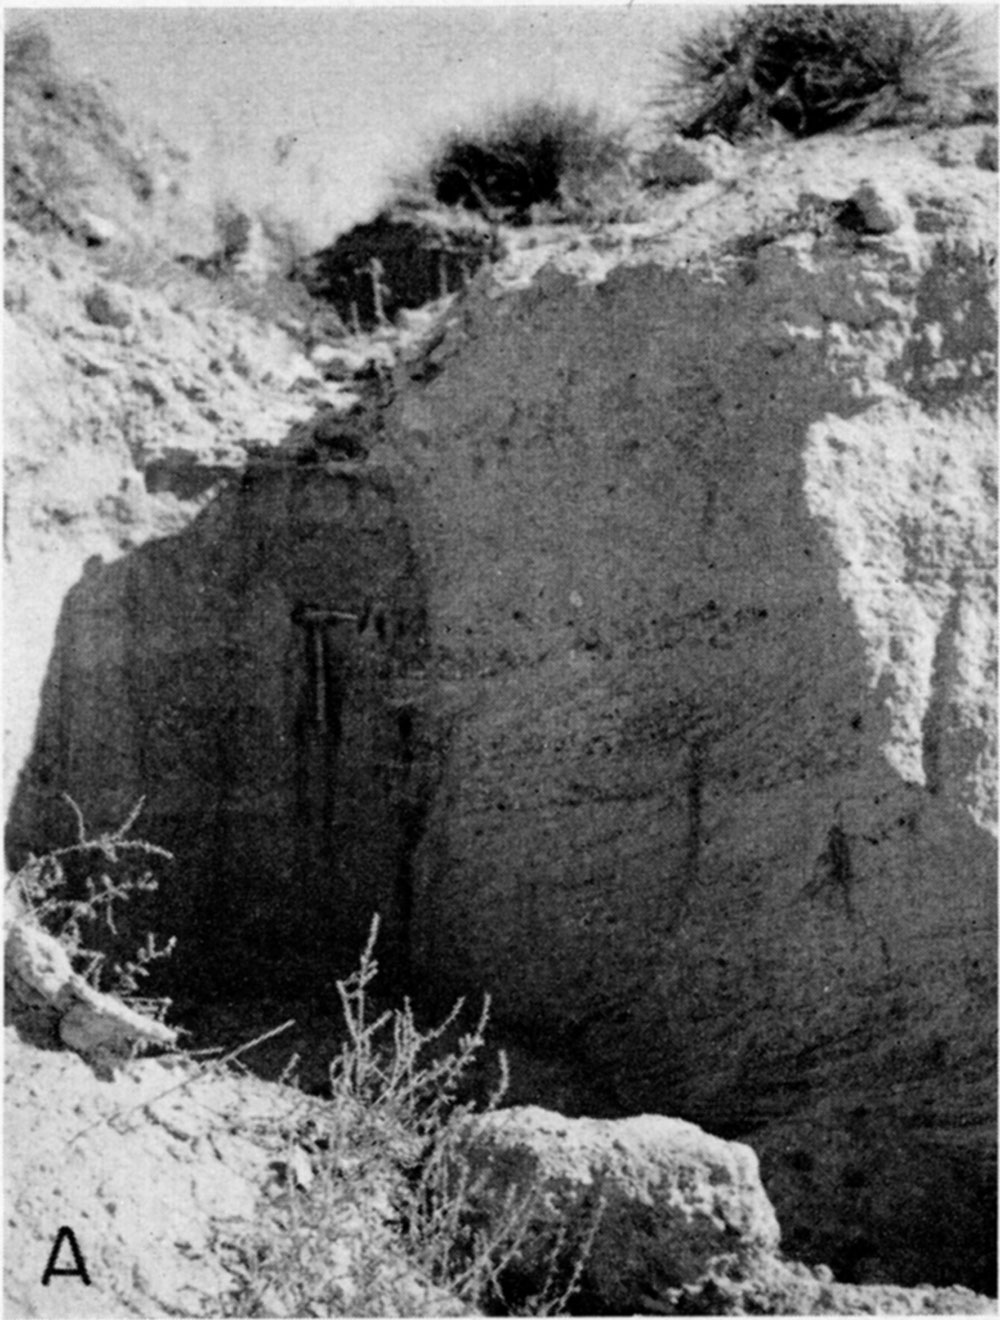 black and white photo of outcrop showing cross bedding